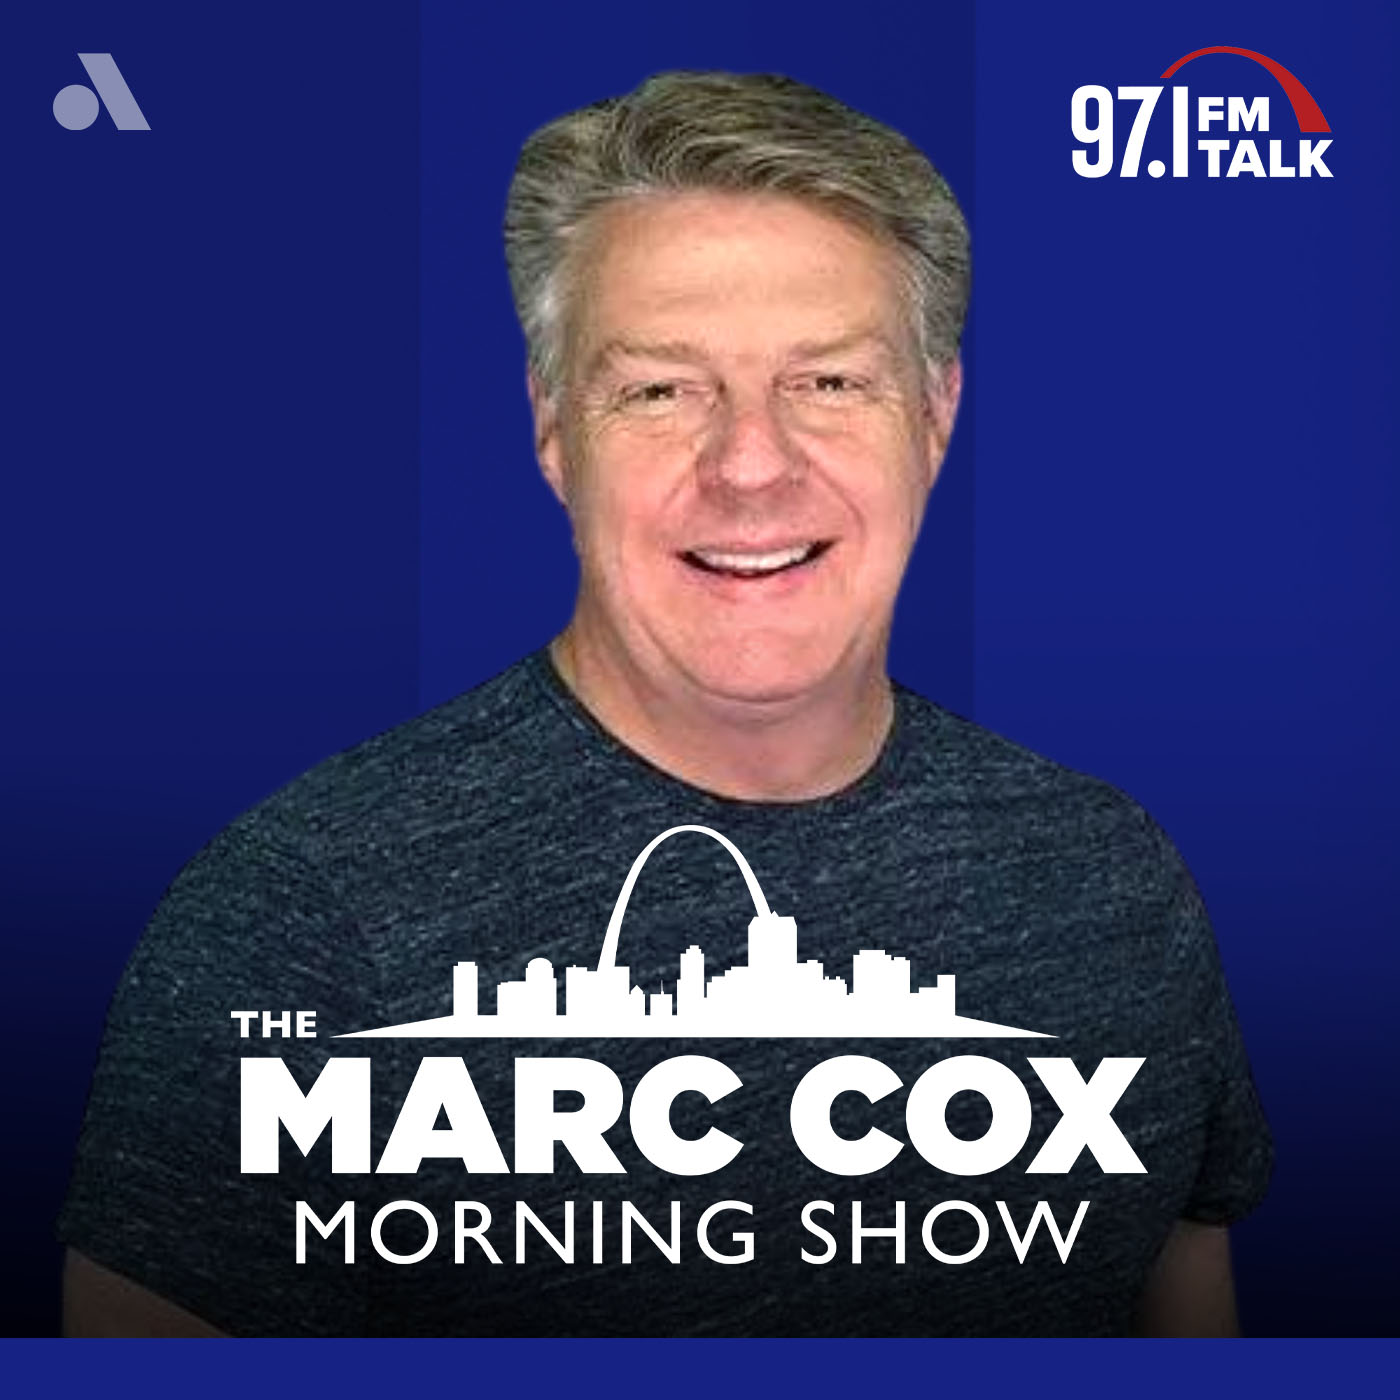 Hour 1 -Immigration Policy, COVID-19 Vaccine Safety, Earnings Tax Rebates, and The Mississippi River Festival